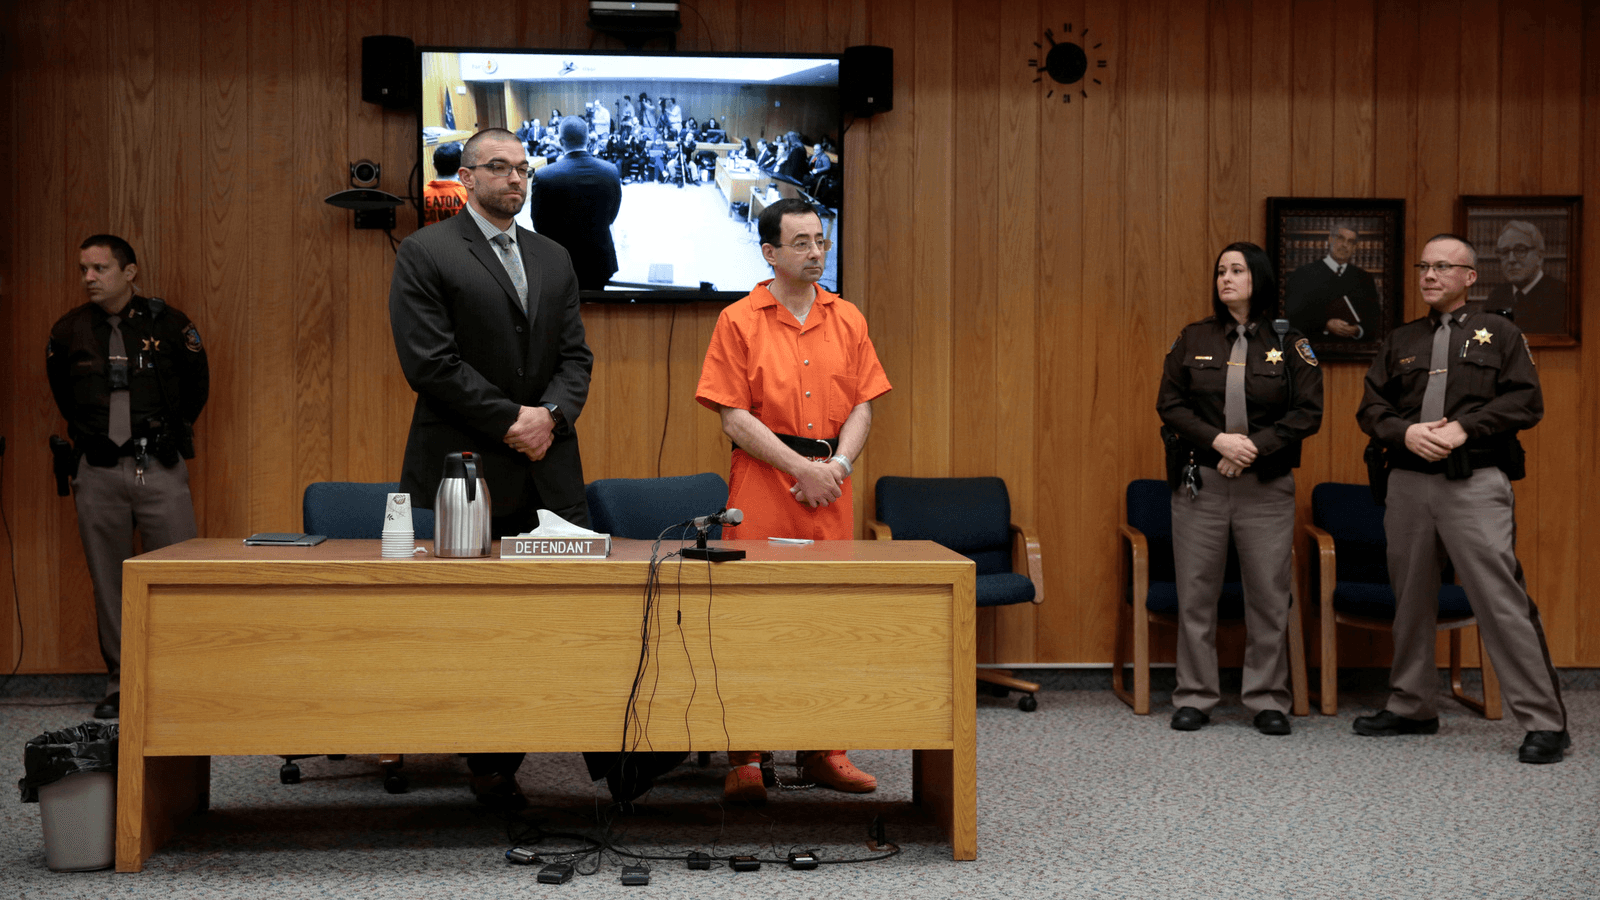 Larry Nassar, a former team USA Gymnastics doctor who pleaded guilty in November 2017 to sexual assault charges, and his defense attorney Matt Newburg stand during Nassar's sentencing hearing in the Eaton County Court in Charlotte, Michigan, Feb. 5, 2018.